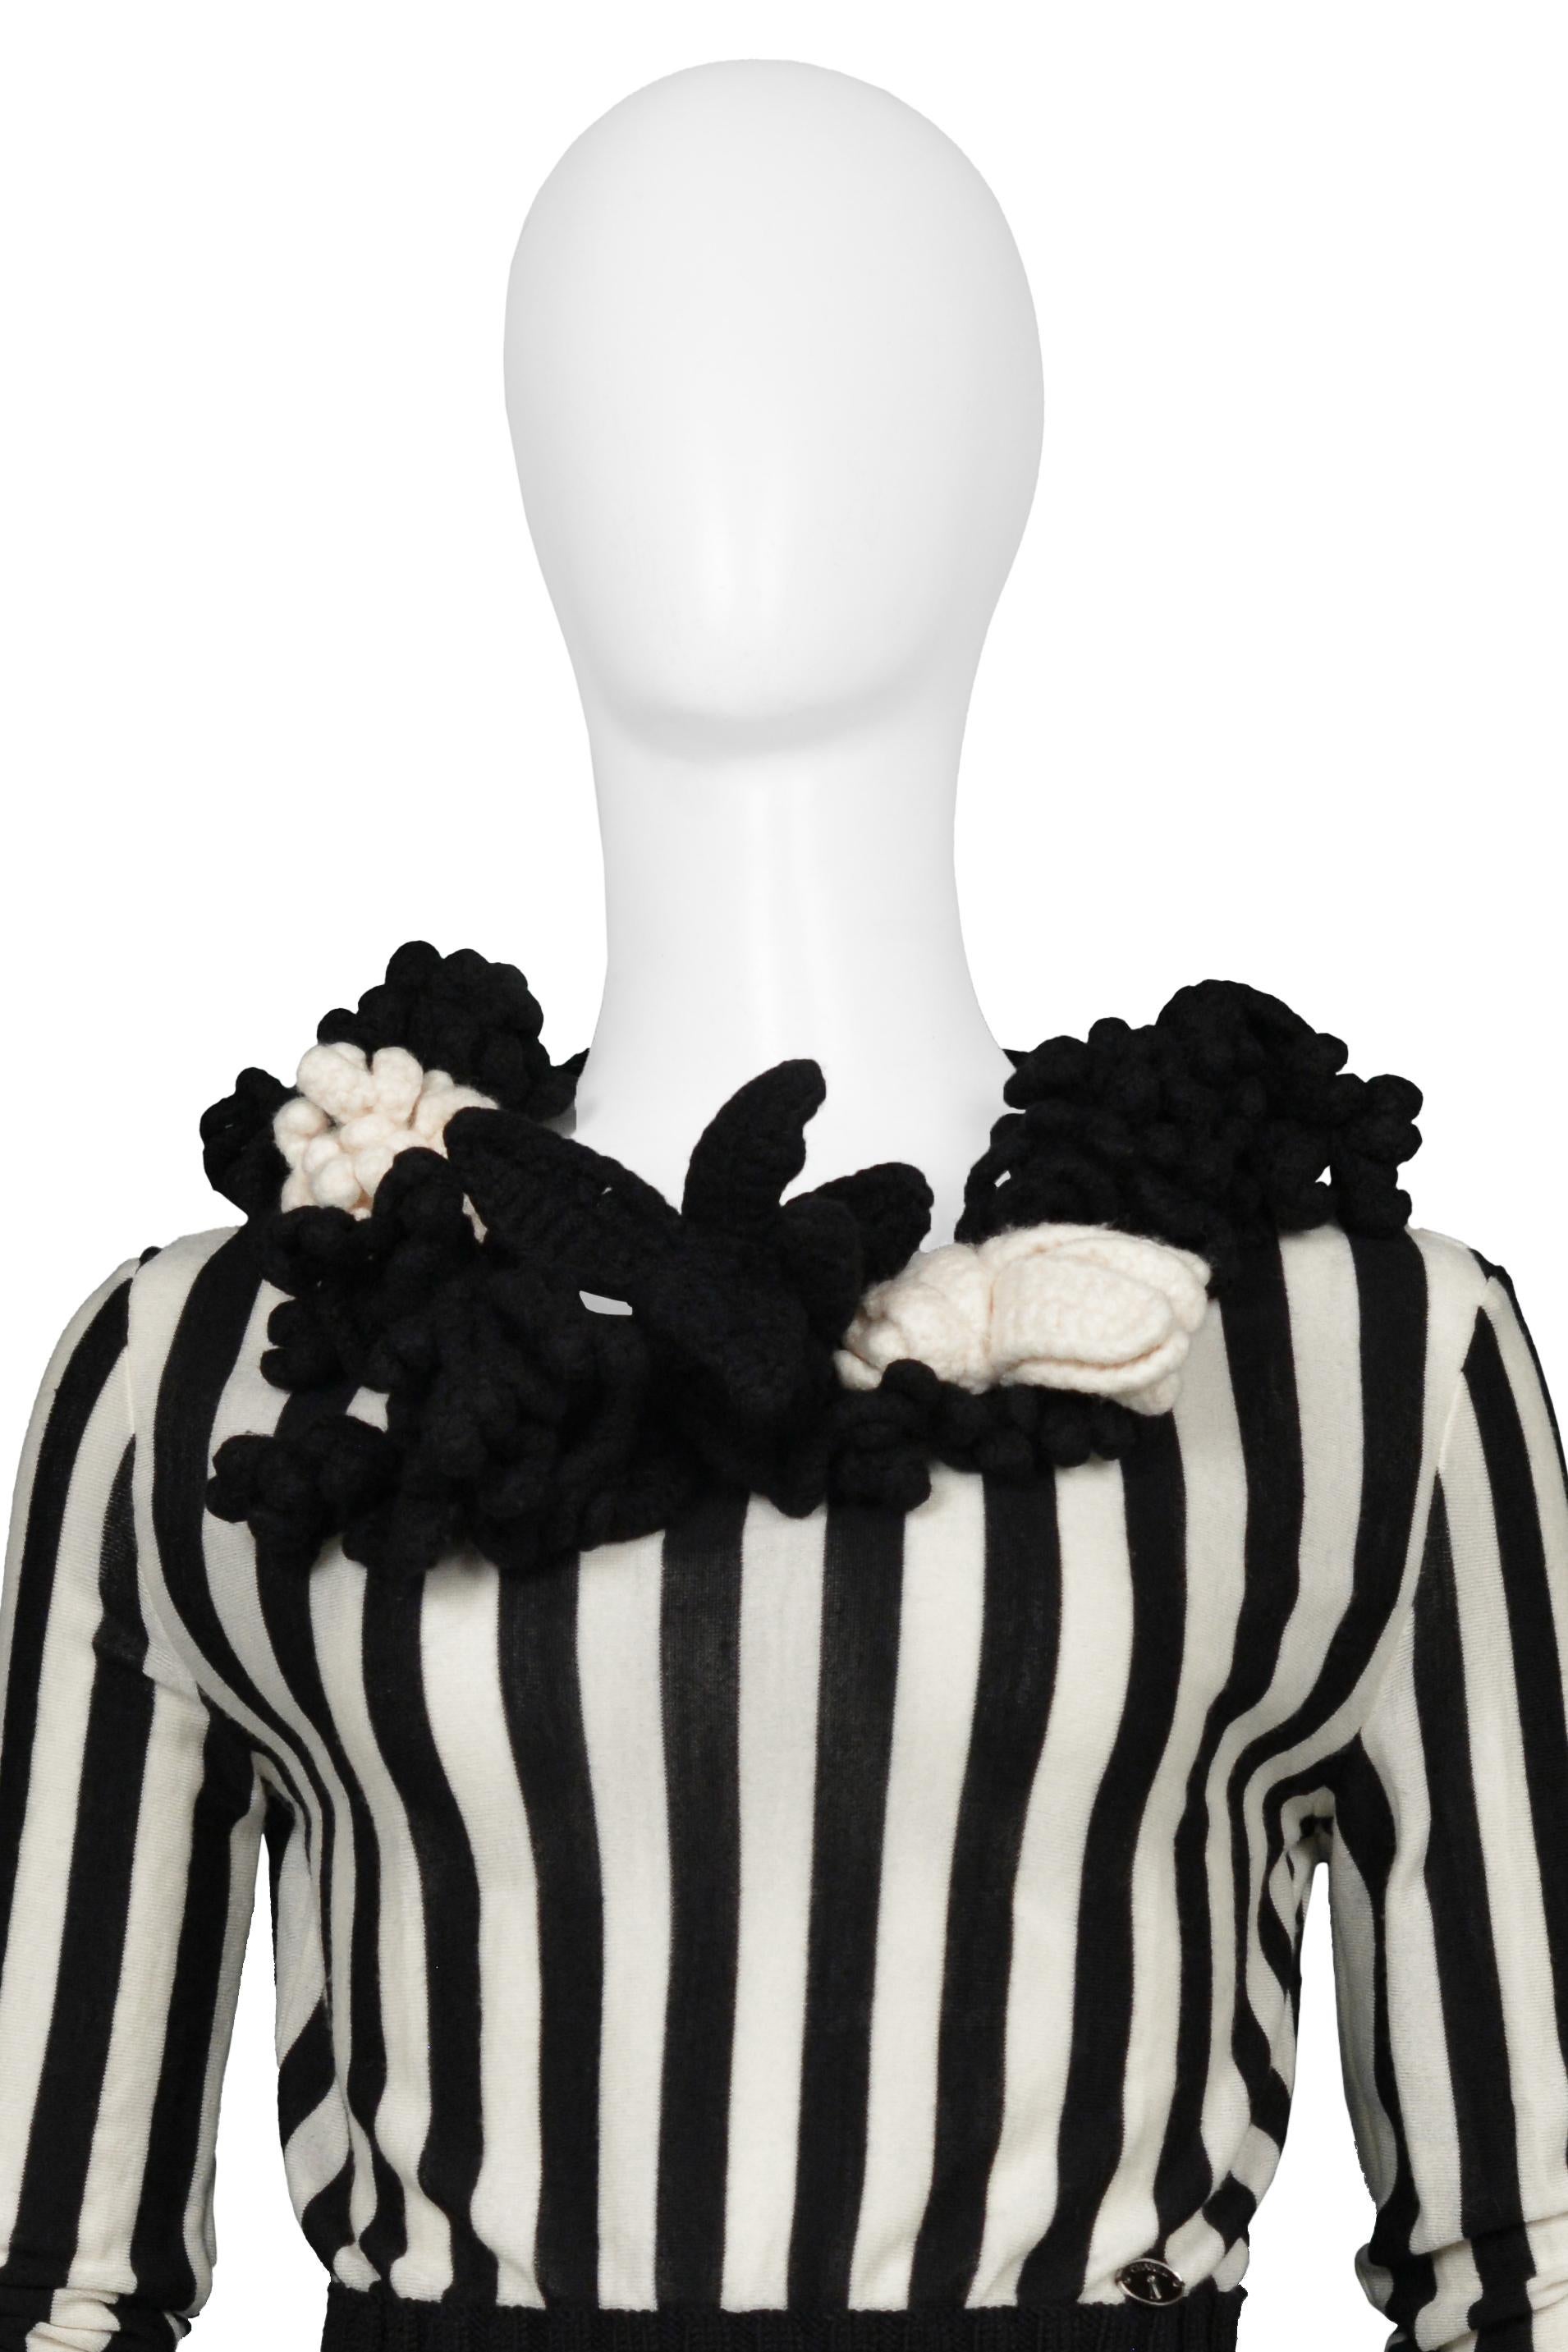 Chanel Black & White Knit Striped Top With Crochet Flowers 2007 In Excellent Condition For Sale In Los Angeles, CA